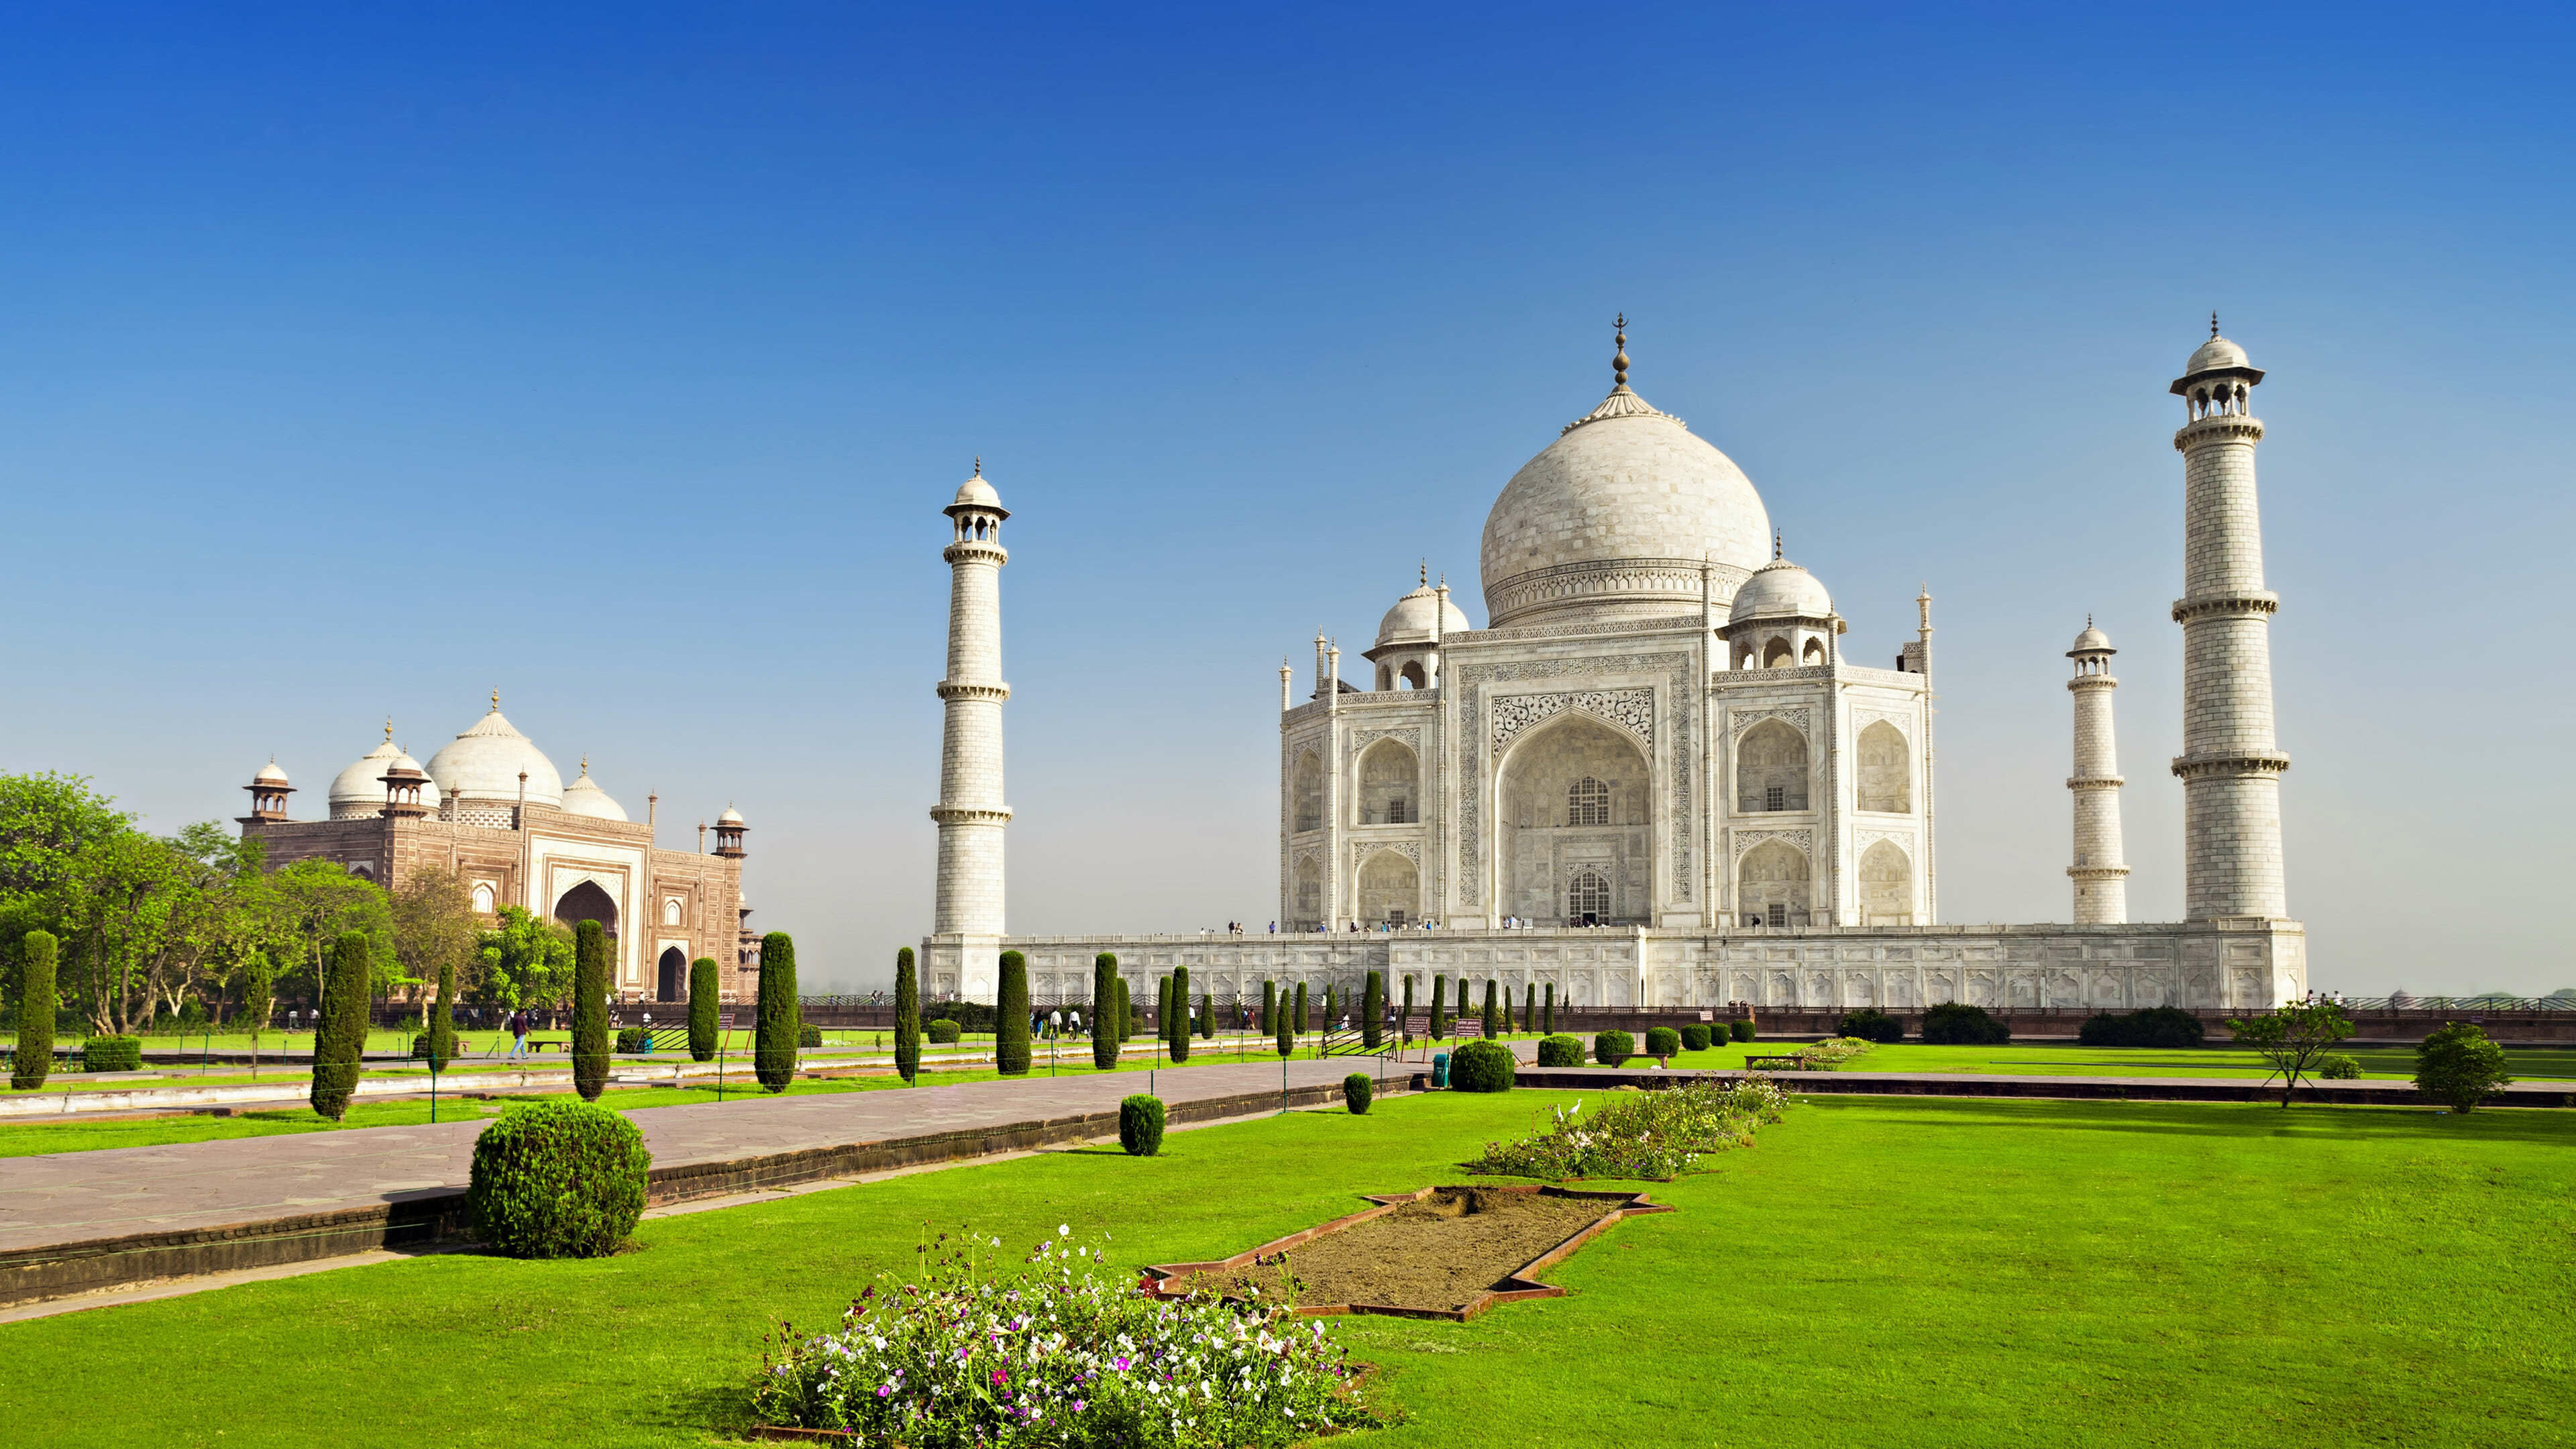 India: Designated as a UNESCO World Heritage Site in 1983 for being "the jewel of Muslim art in India and one of the universally admired masterpieces of the world's heritage", Agra. 3840x2160 4K Wallpaper.